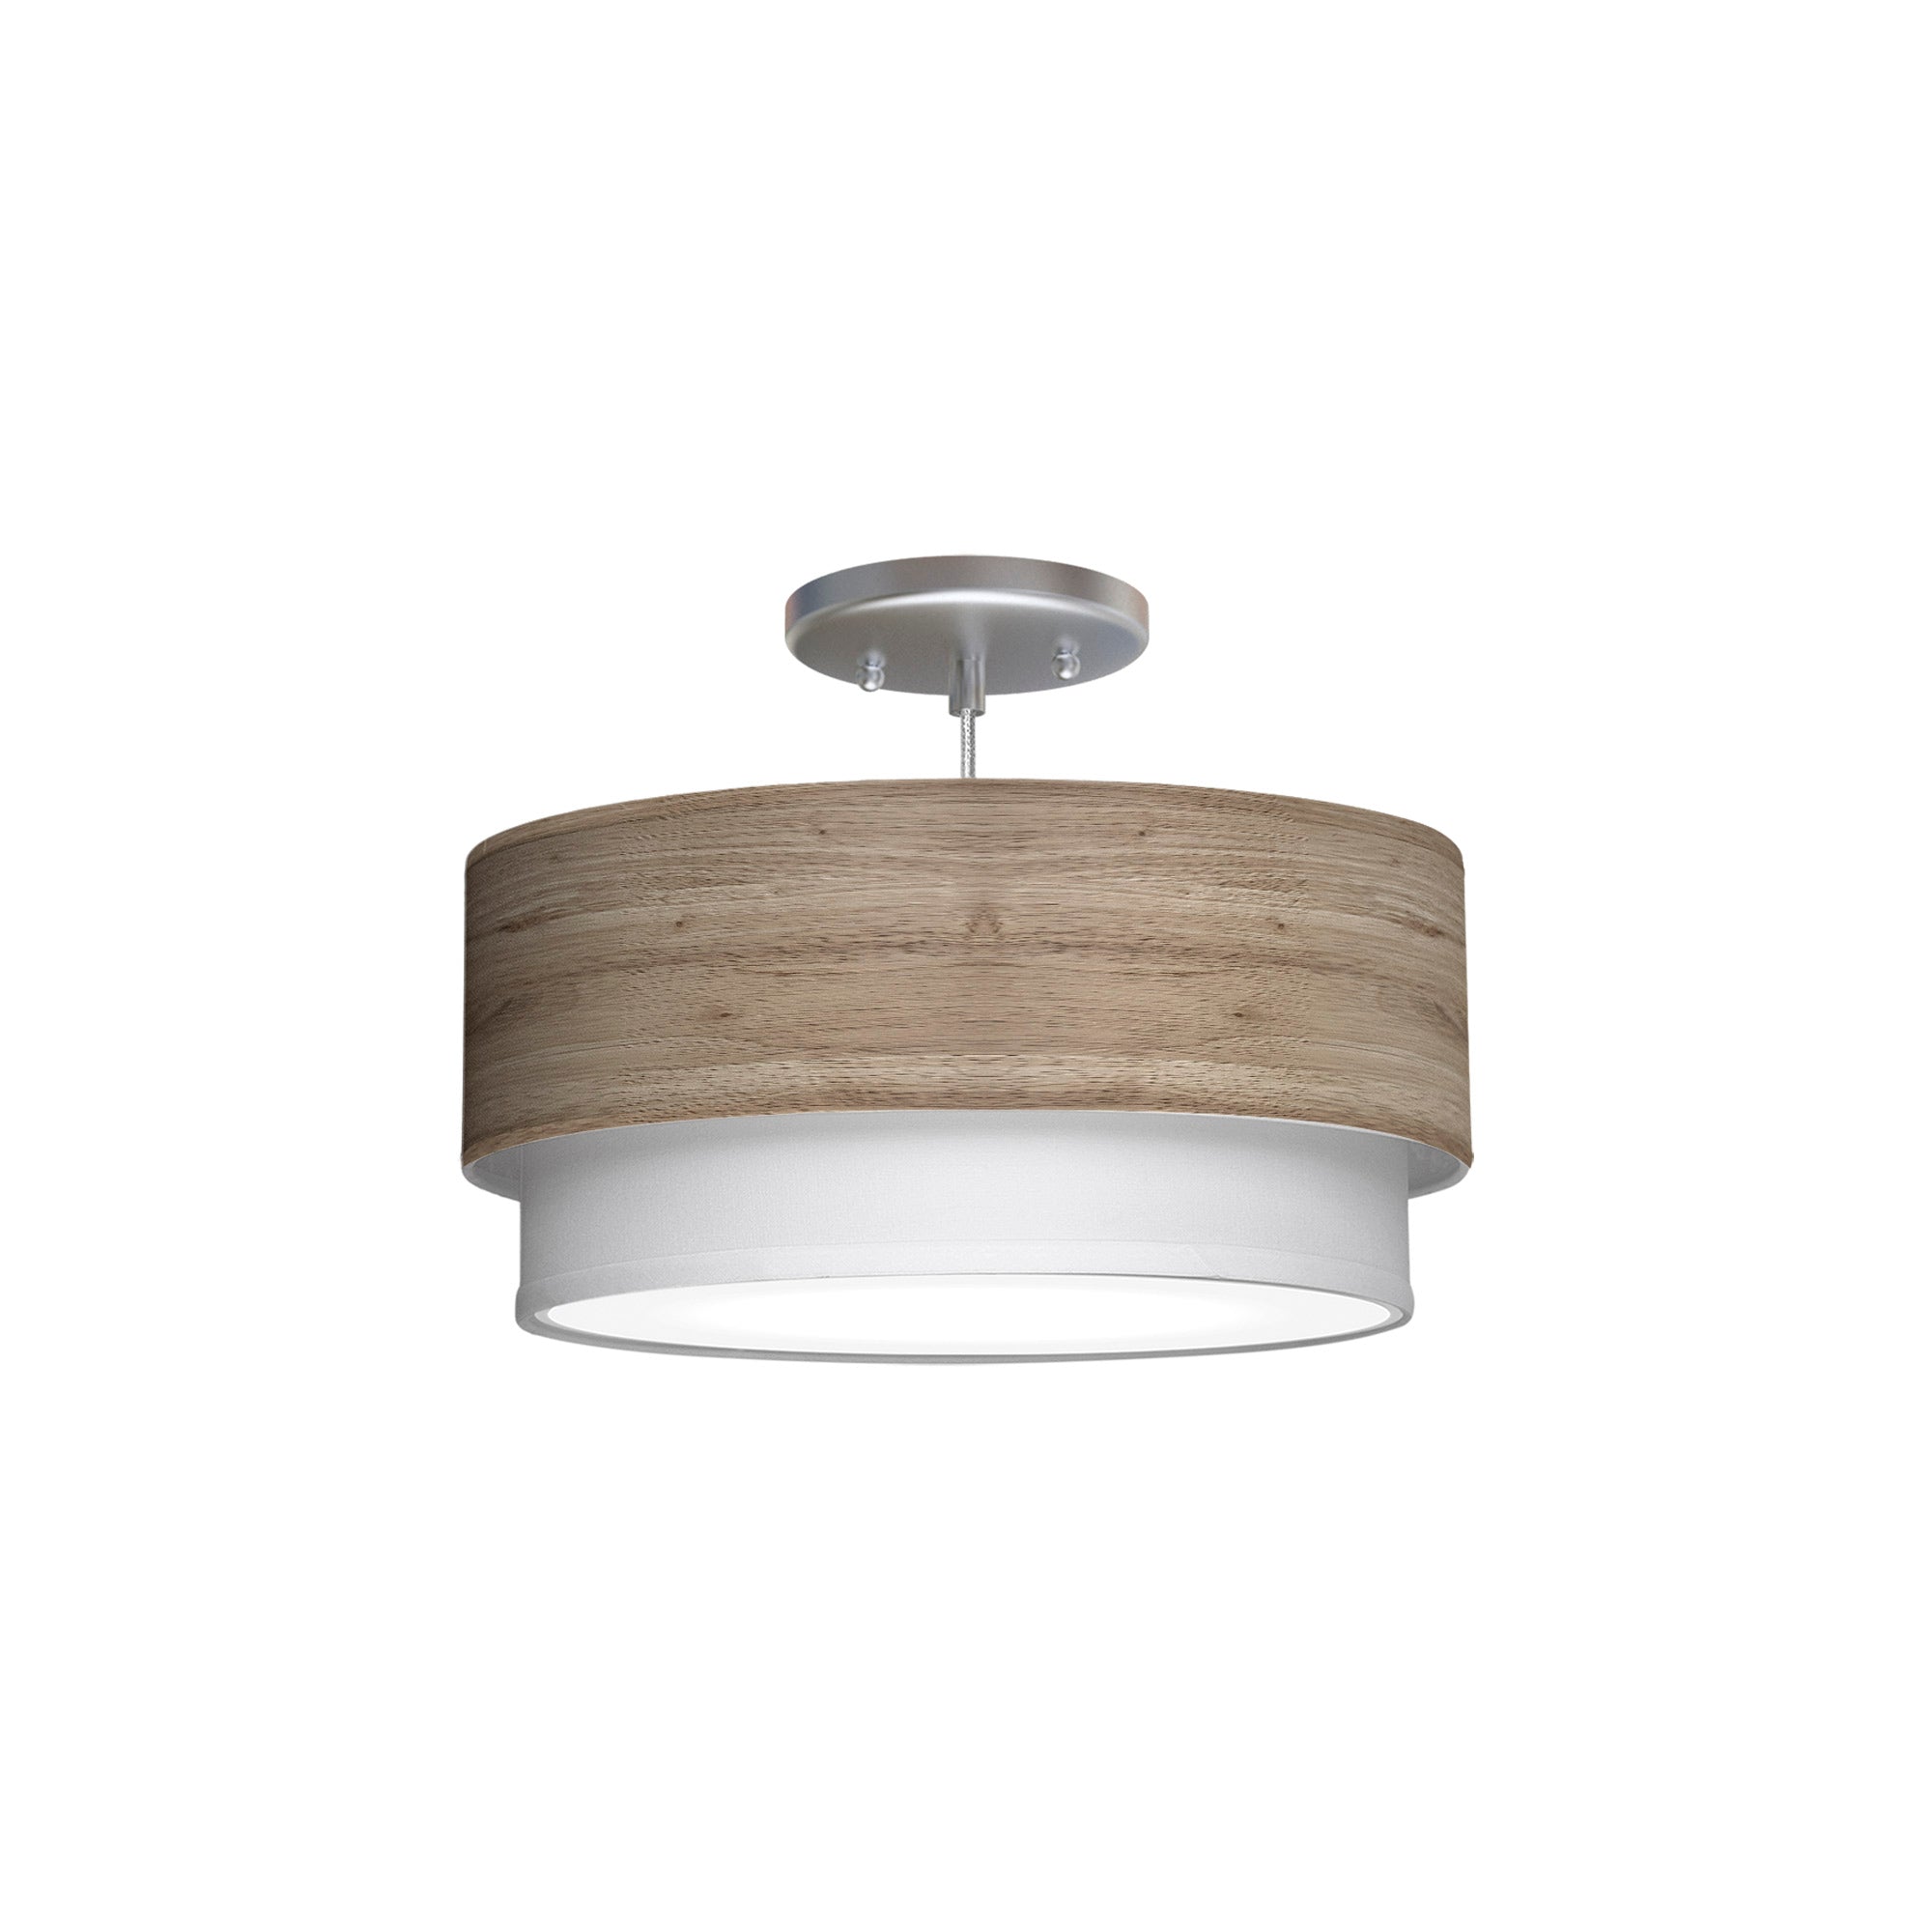 The Lenny Hanging Lamp from Seascape Fixtures with a photo veneer shade in natural color.